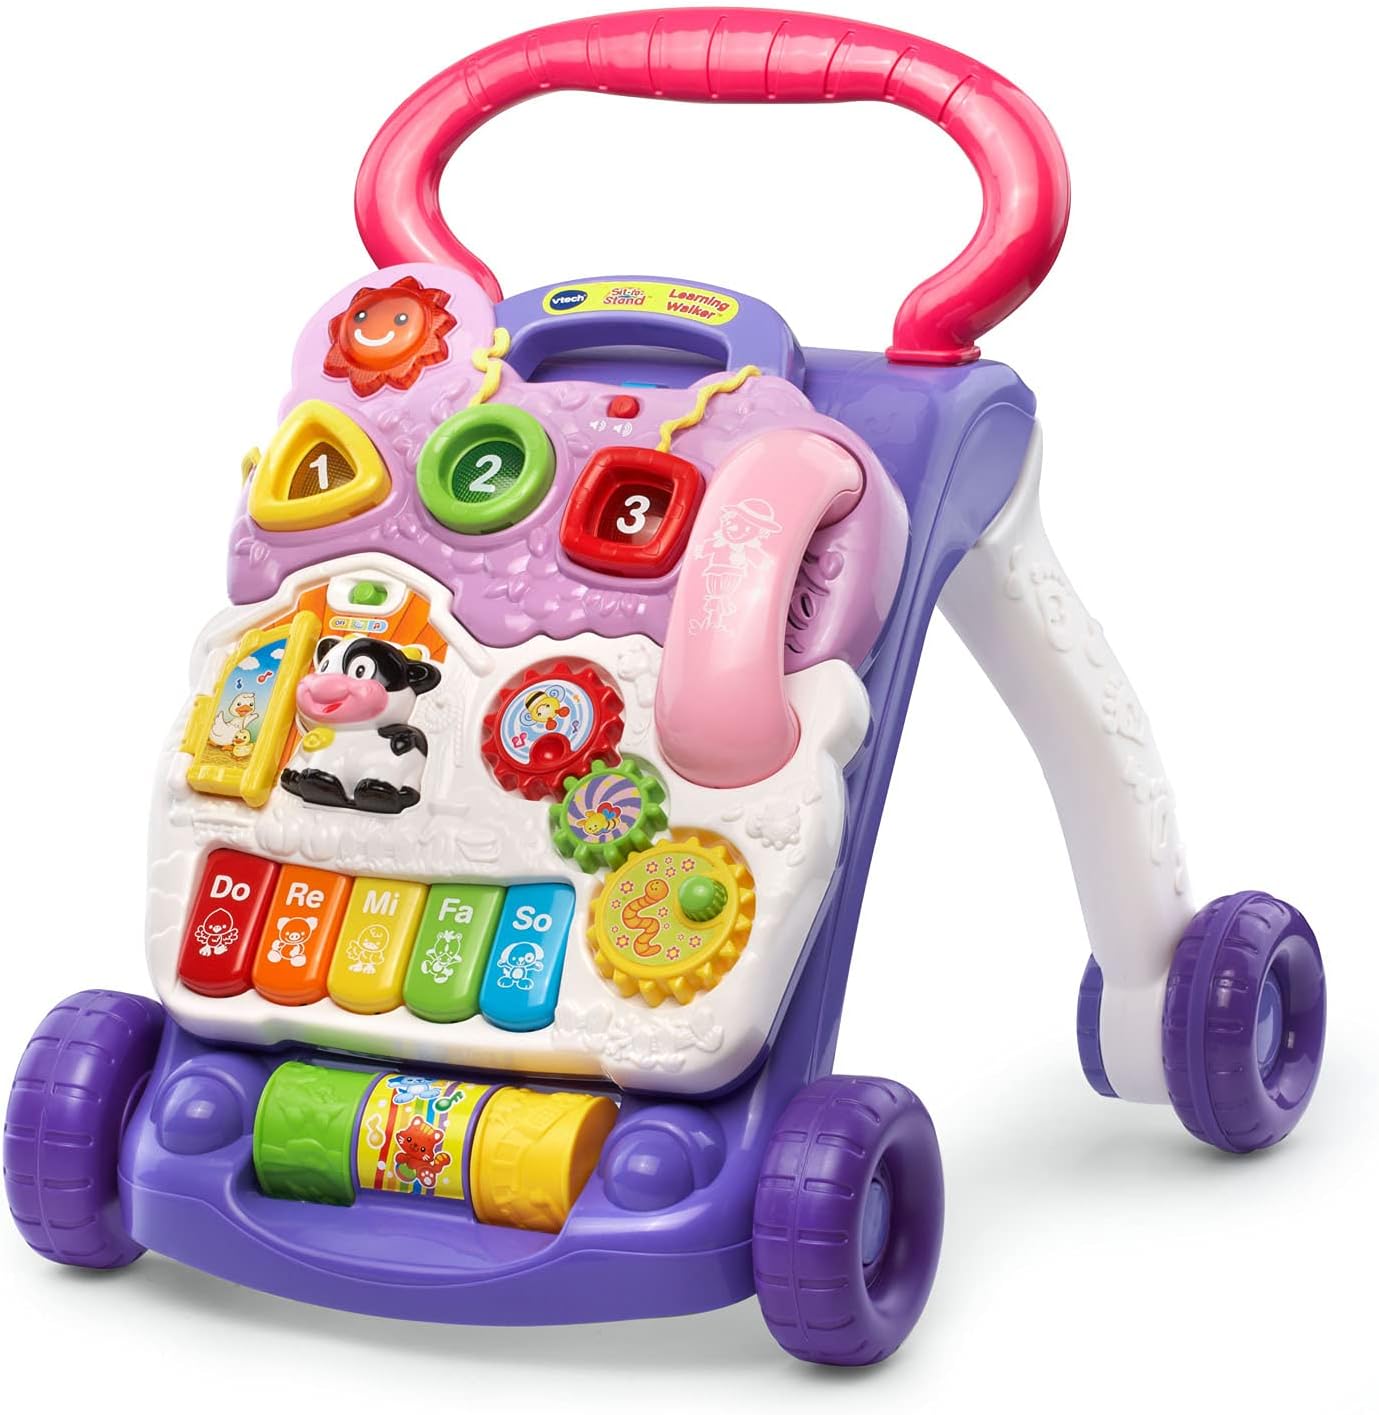 VTech Sit-to-Stand Learning Walker (Frustration Free Packaging), Lavender (Amazon Exclusive)